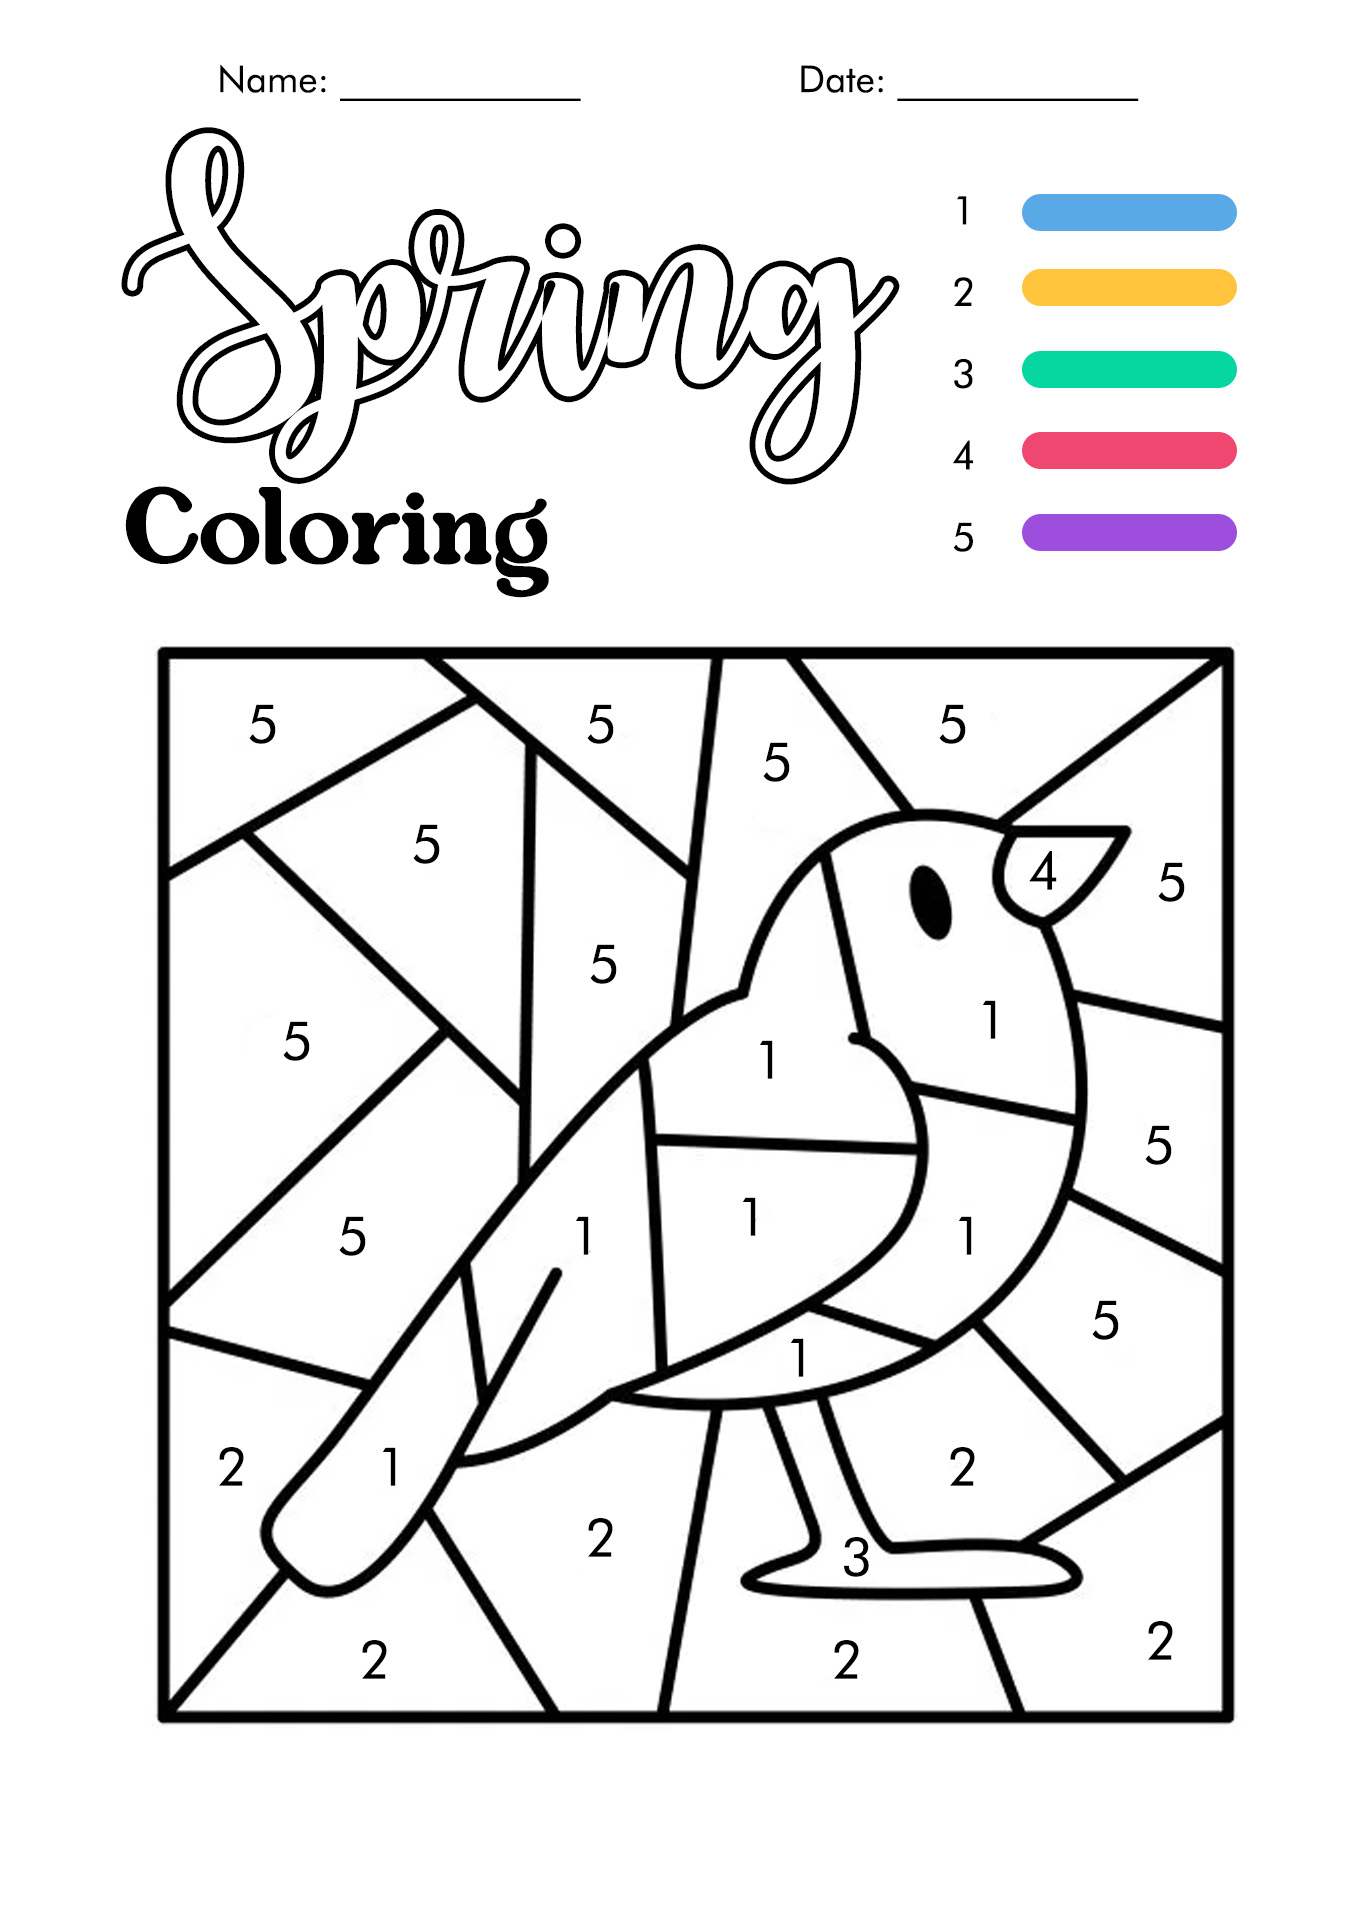 Coloring By Numbers Worksheets For Kindergarteners